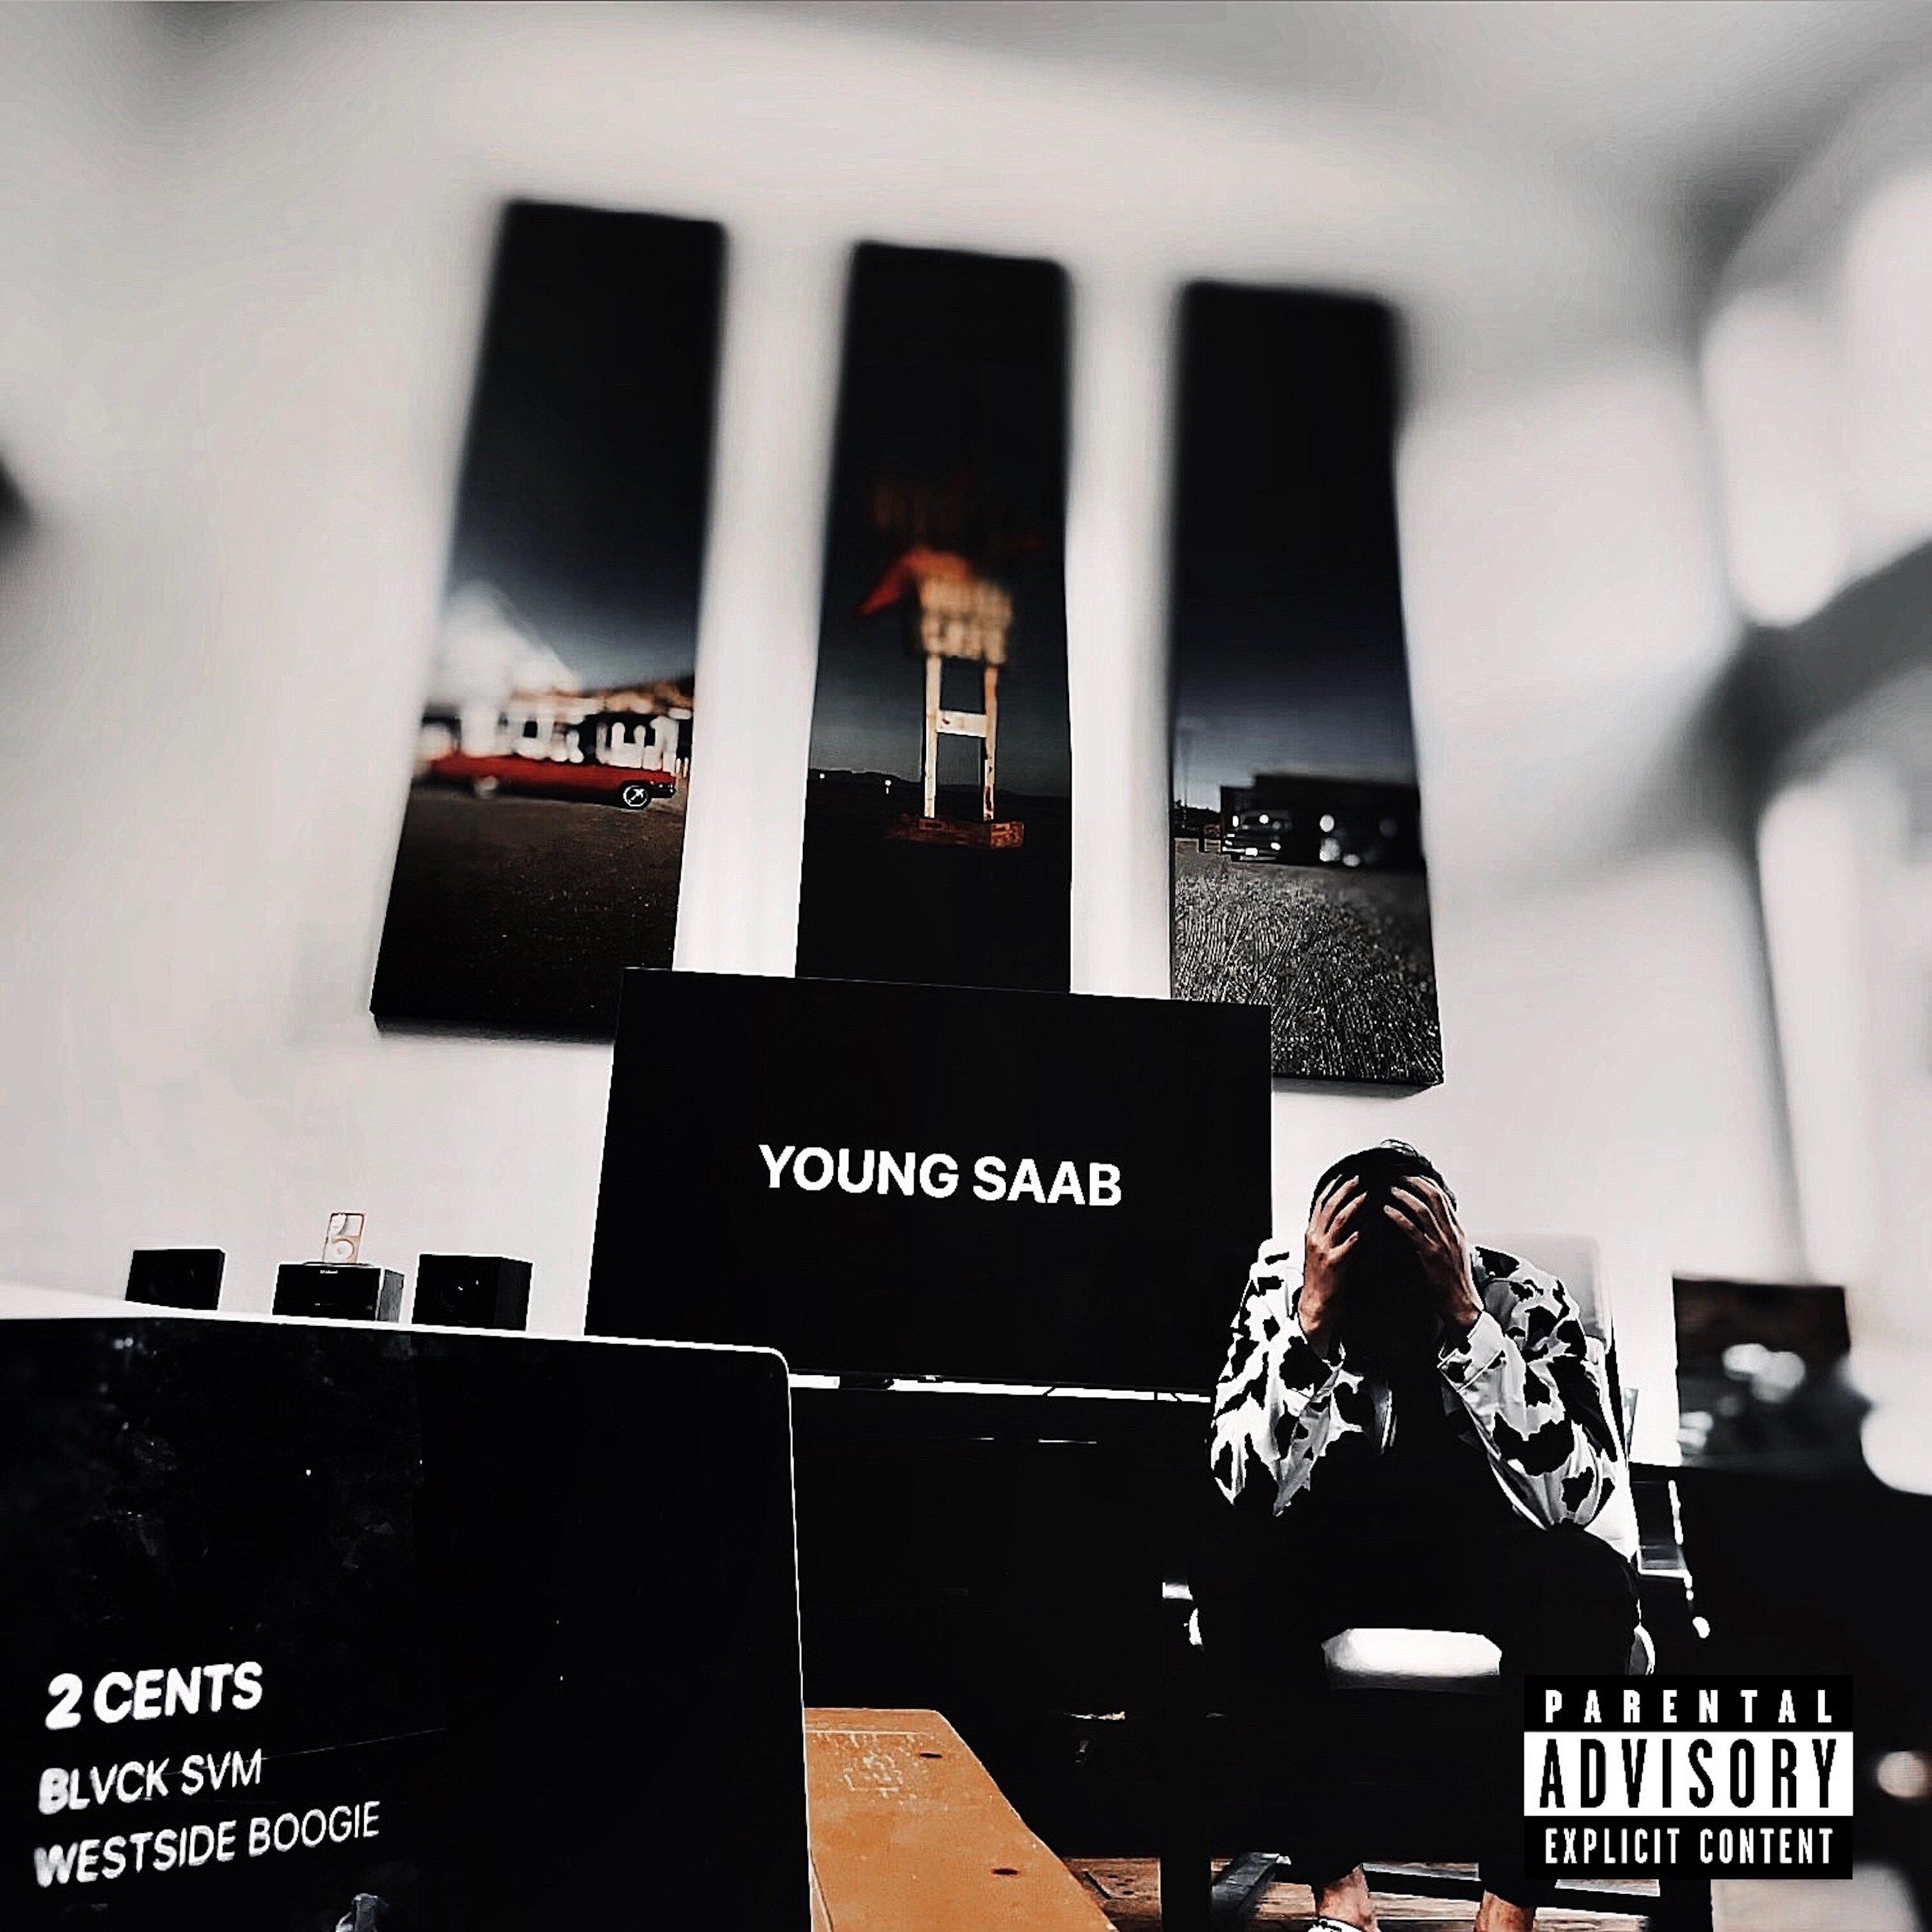 Young Saab - 2 Cents (featuring Blvck Svm & Westside Boogie)